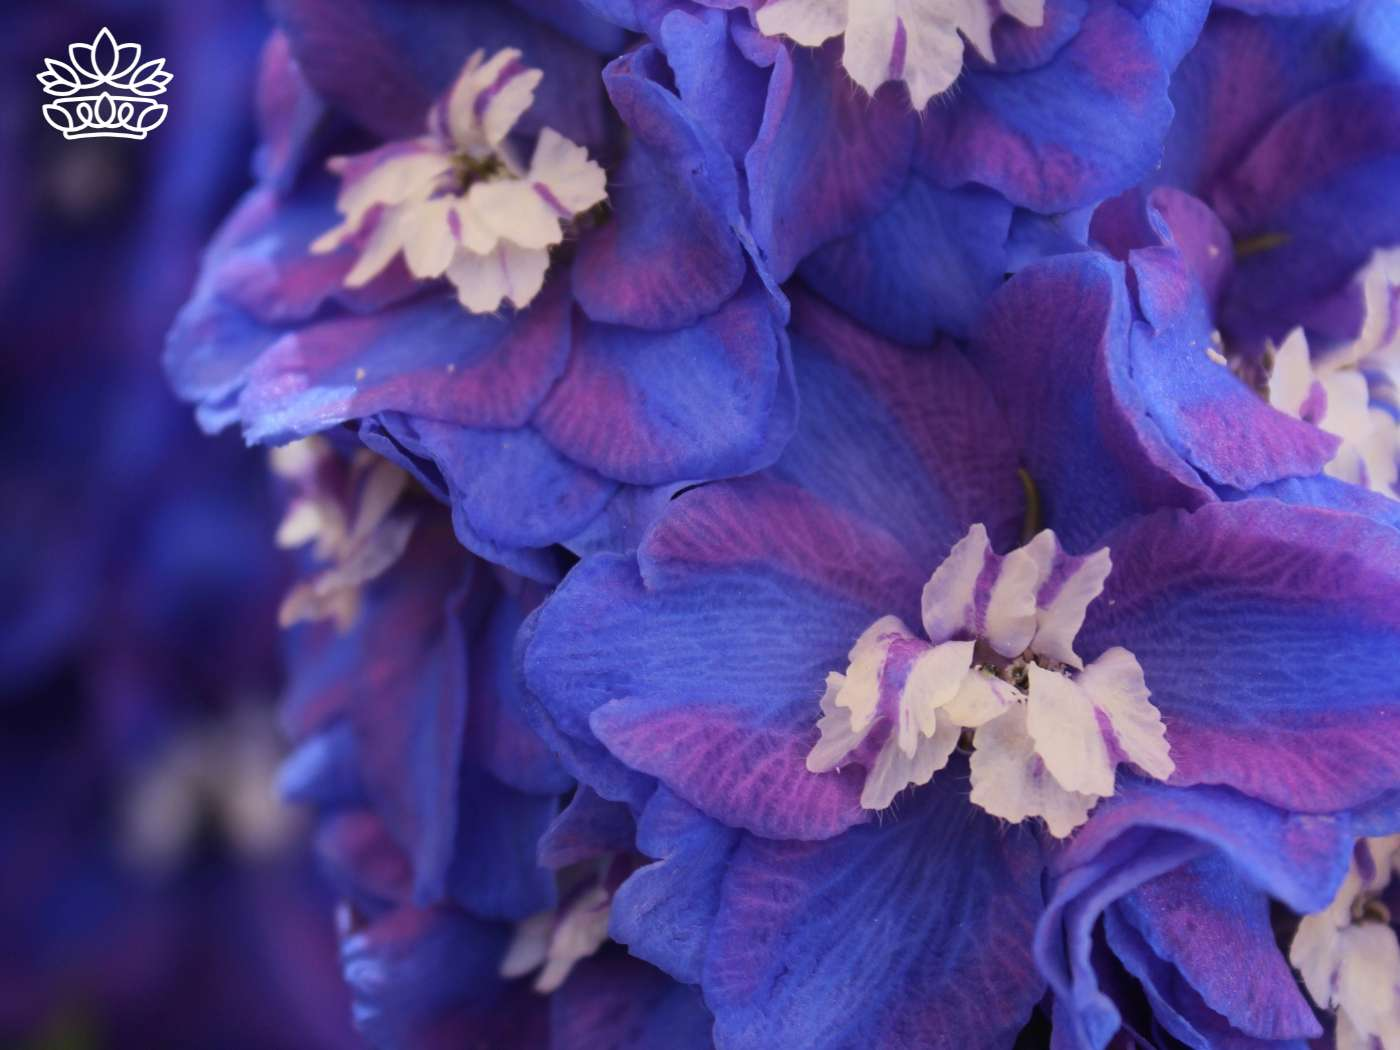 Vibrant close-up of blue delphinium flowers, part of the exquisite Delphiniums Collection by Fabulous Flowers and Gifts.